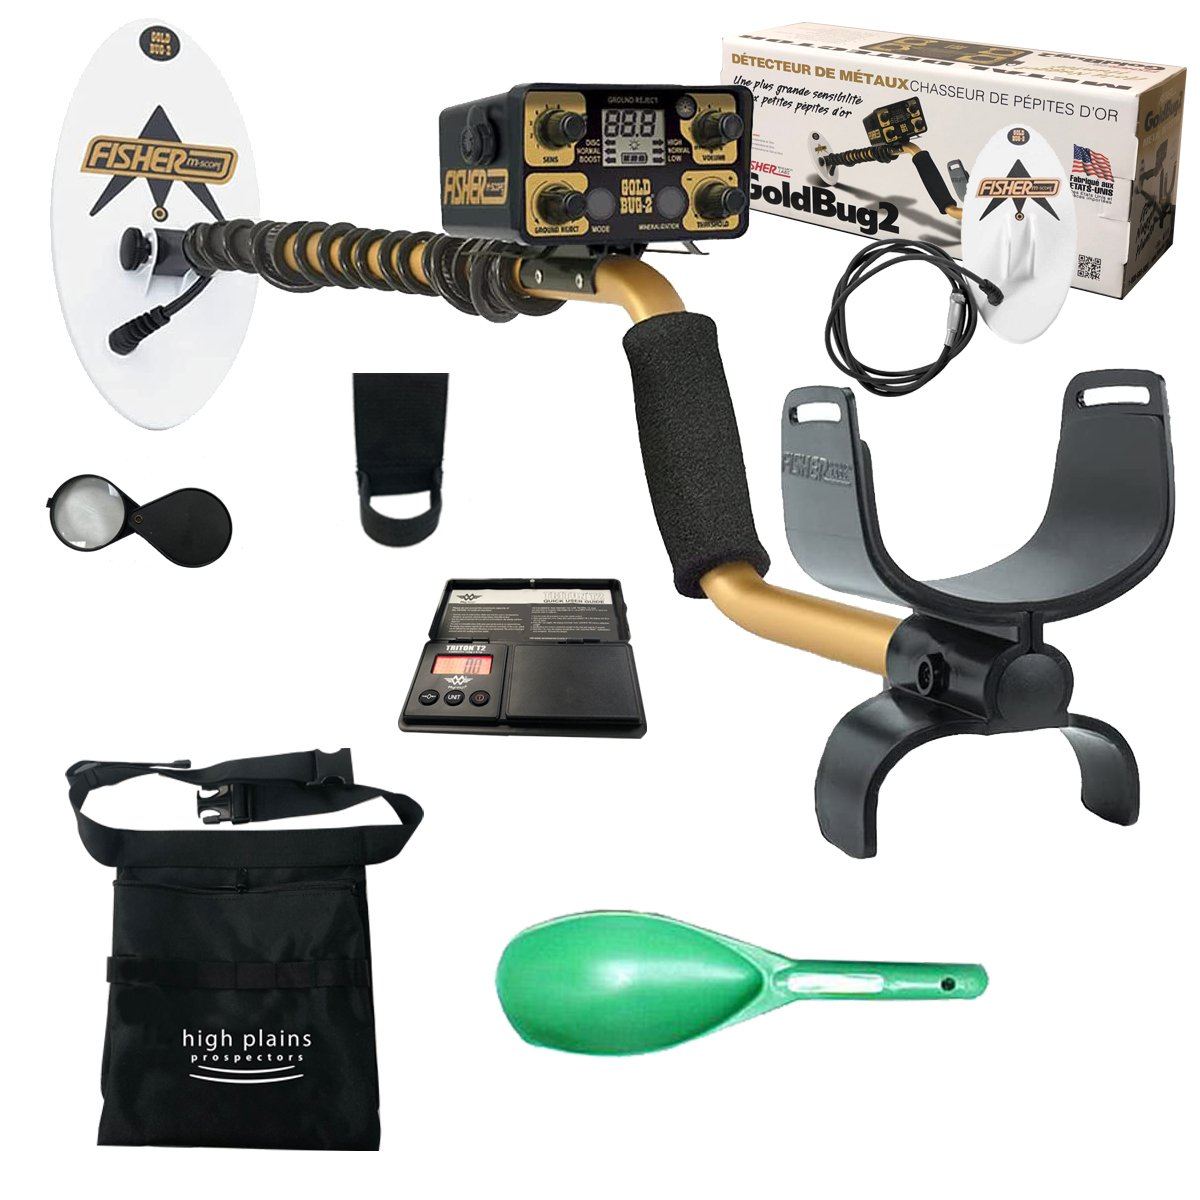 Fisher Gold Bug 2 Combo 6.5" and 10" Coils Bundle with Prospecting Gear